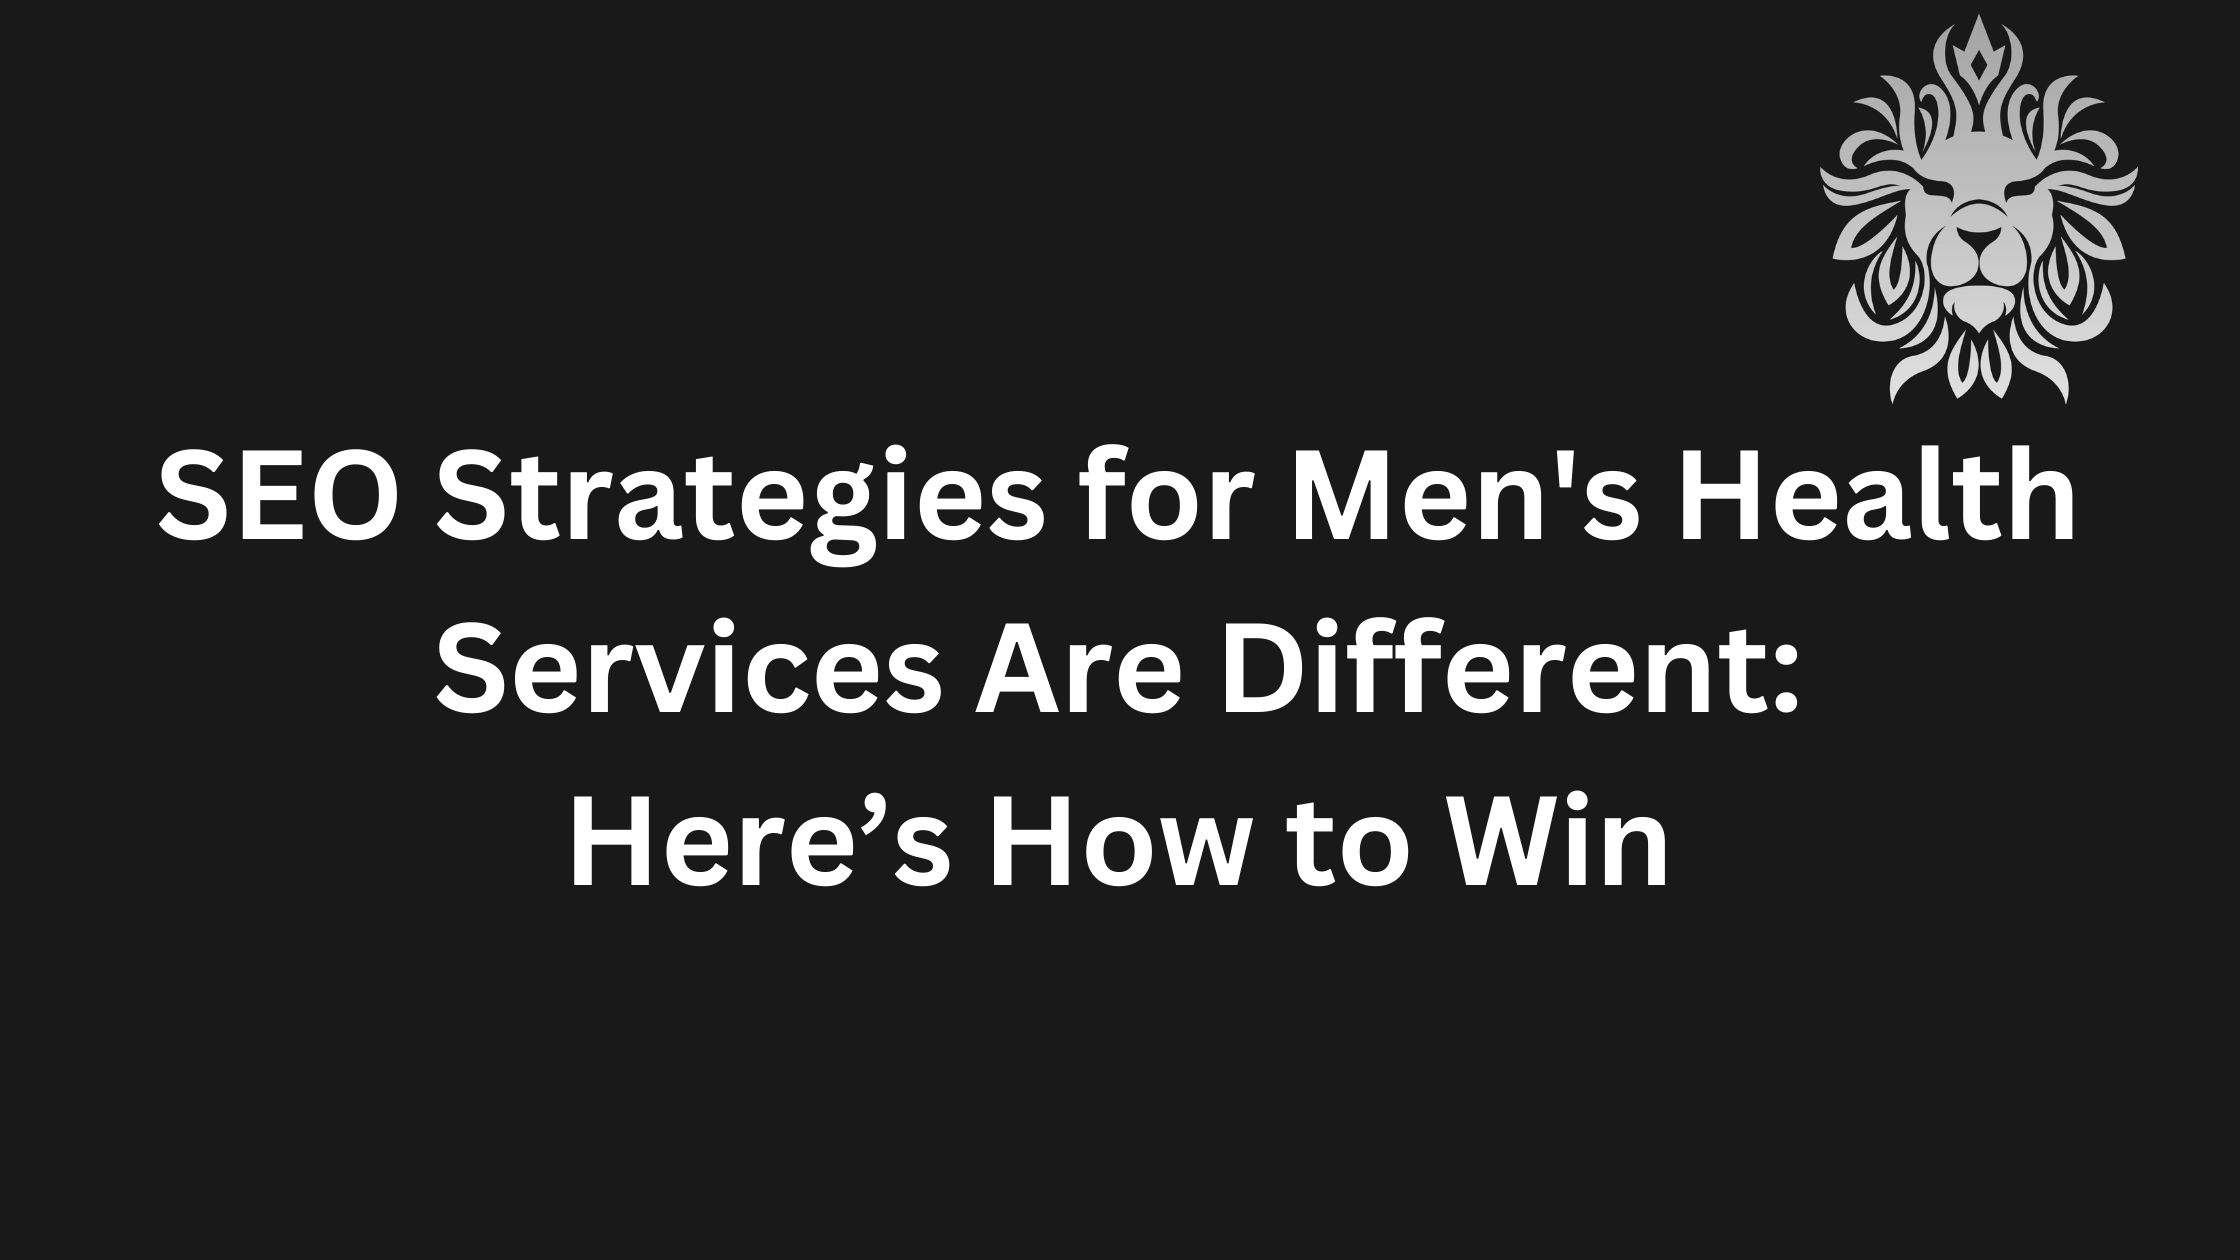 SEO Strategies for Men’s Health Services Are Different